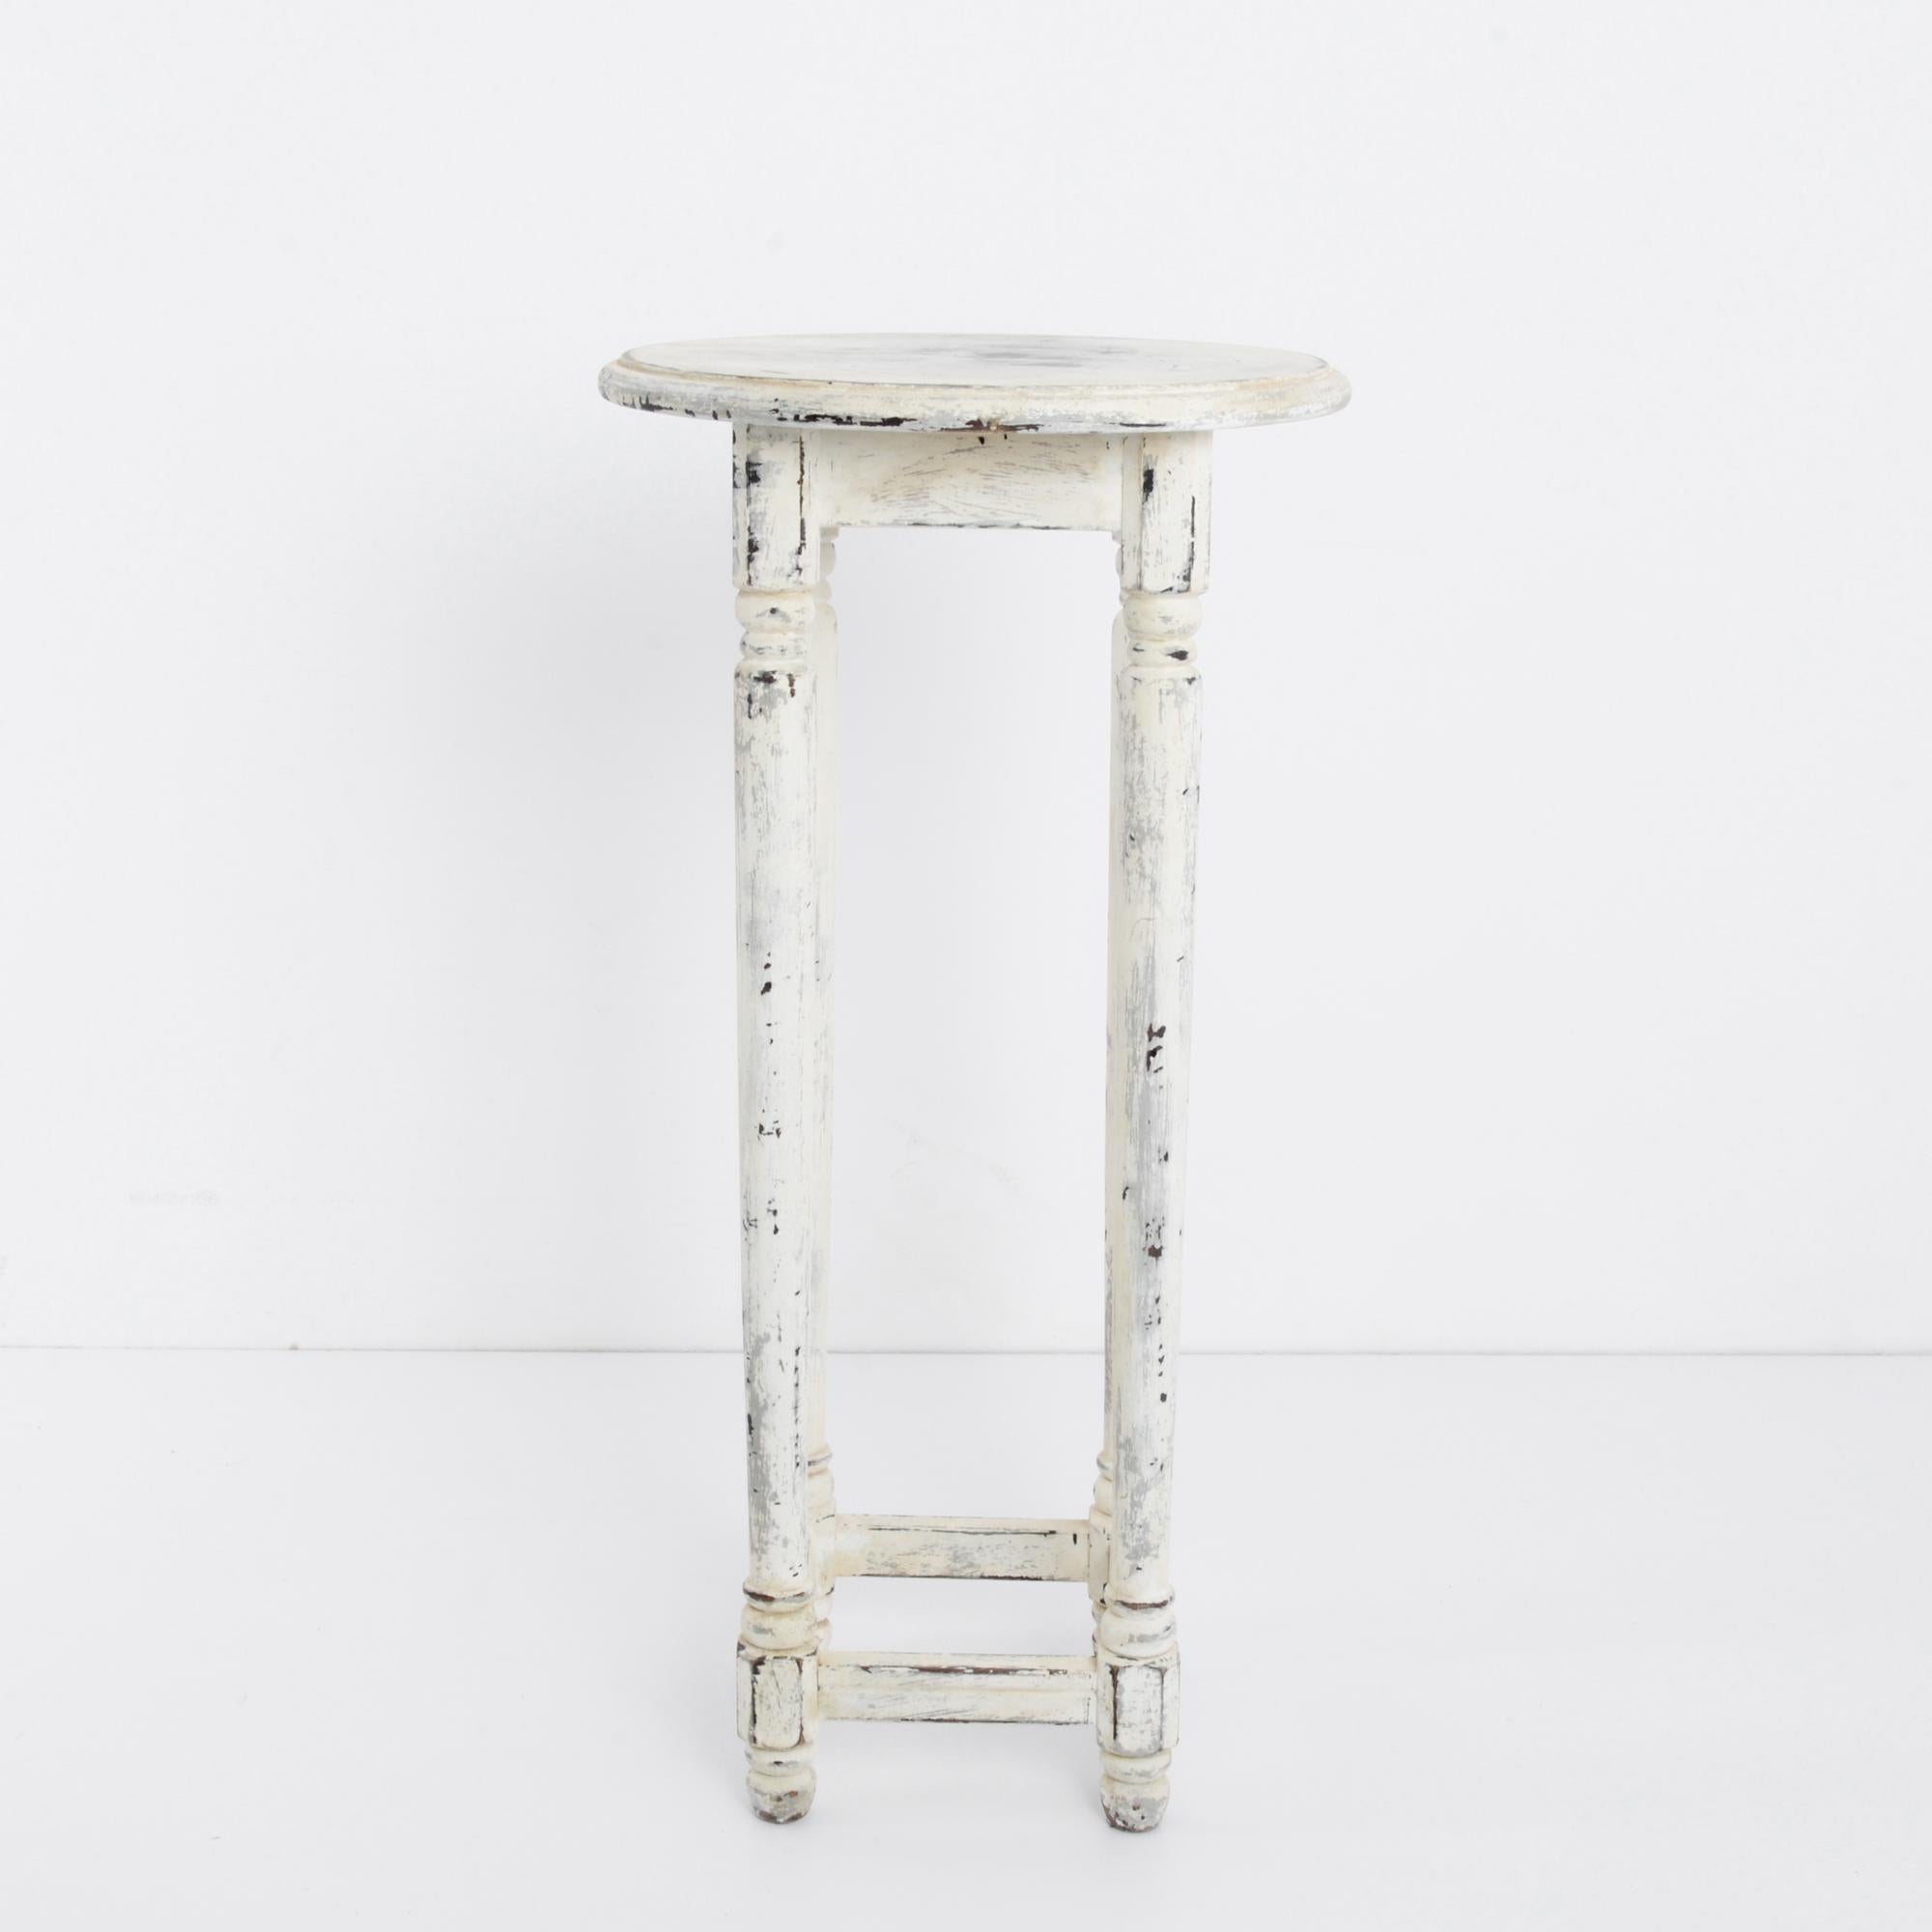 A white wooden side table from France, circa 1930. A small round tabletop sits atop a square apron; four turned legs descend to a square frame at the base. This interplay of shapes lends a pleasing variation to the tall, slender silhouette. The